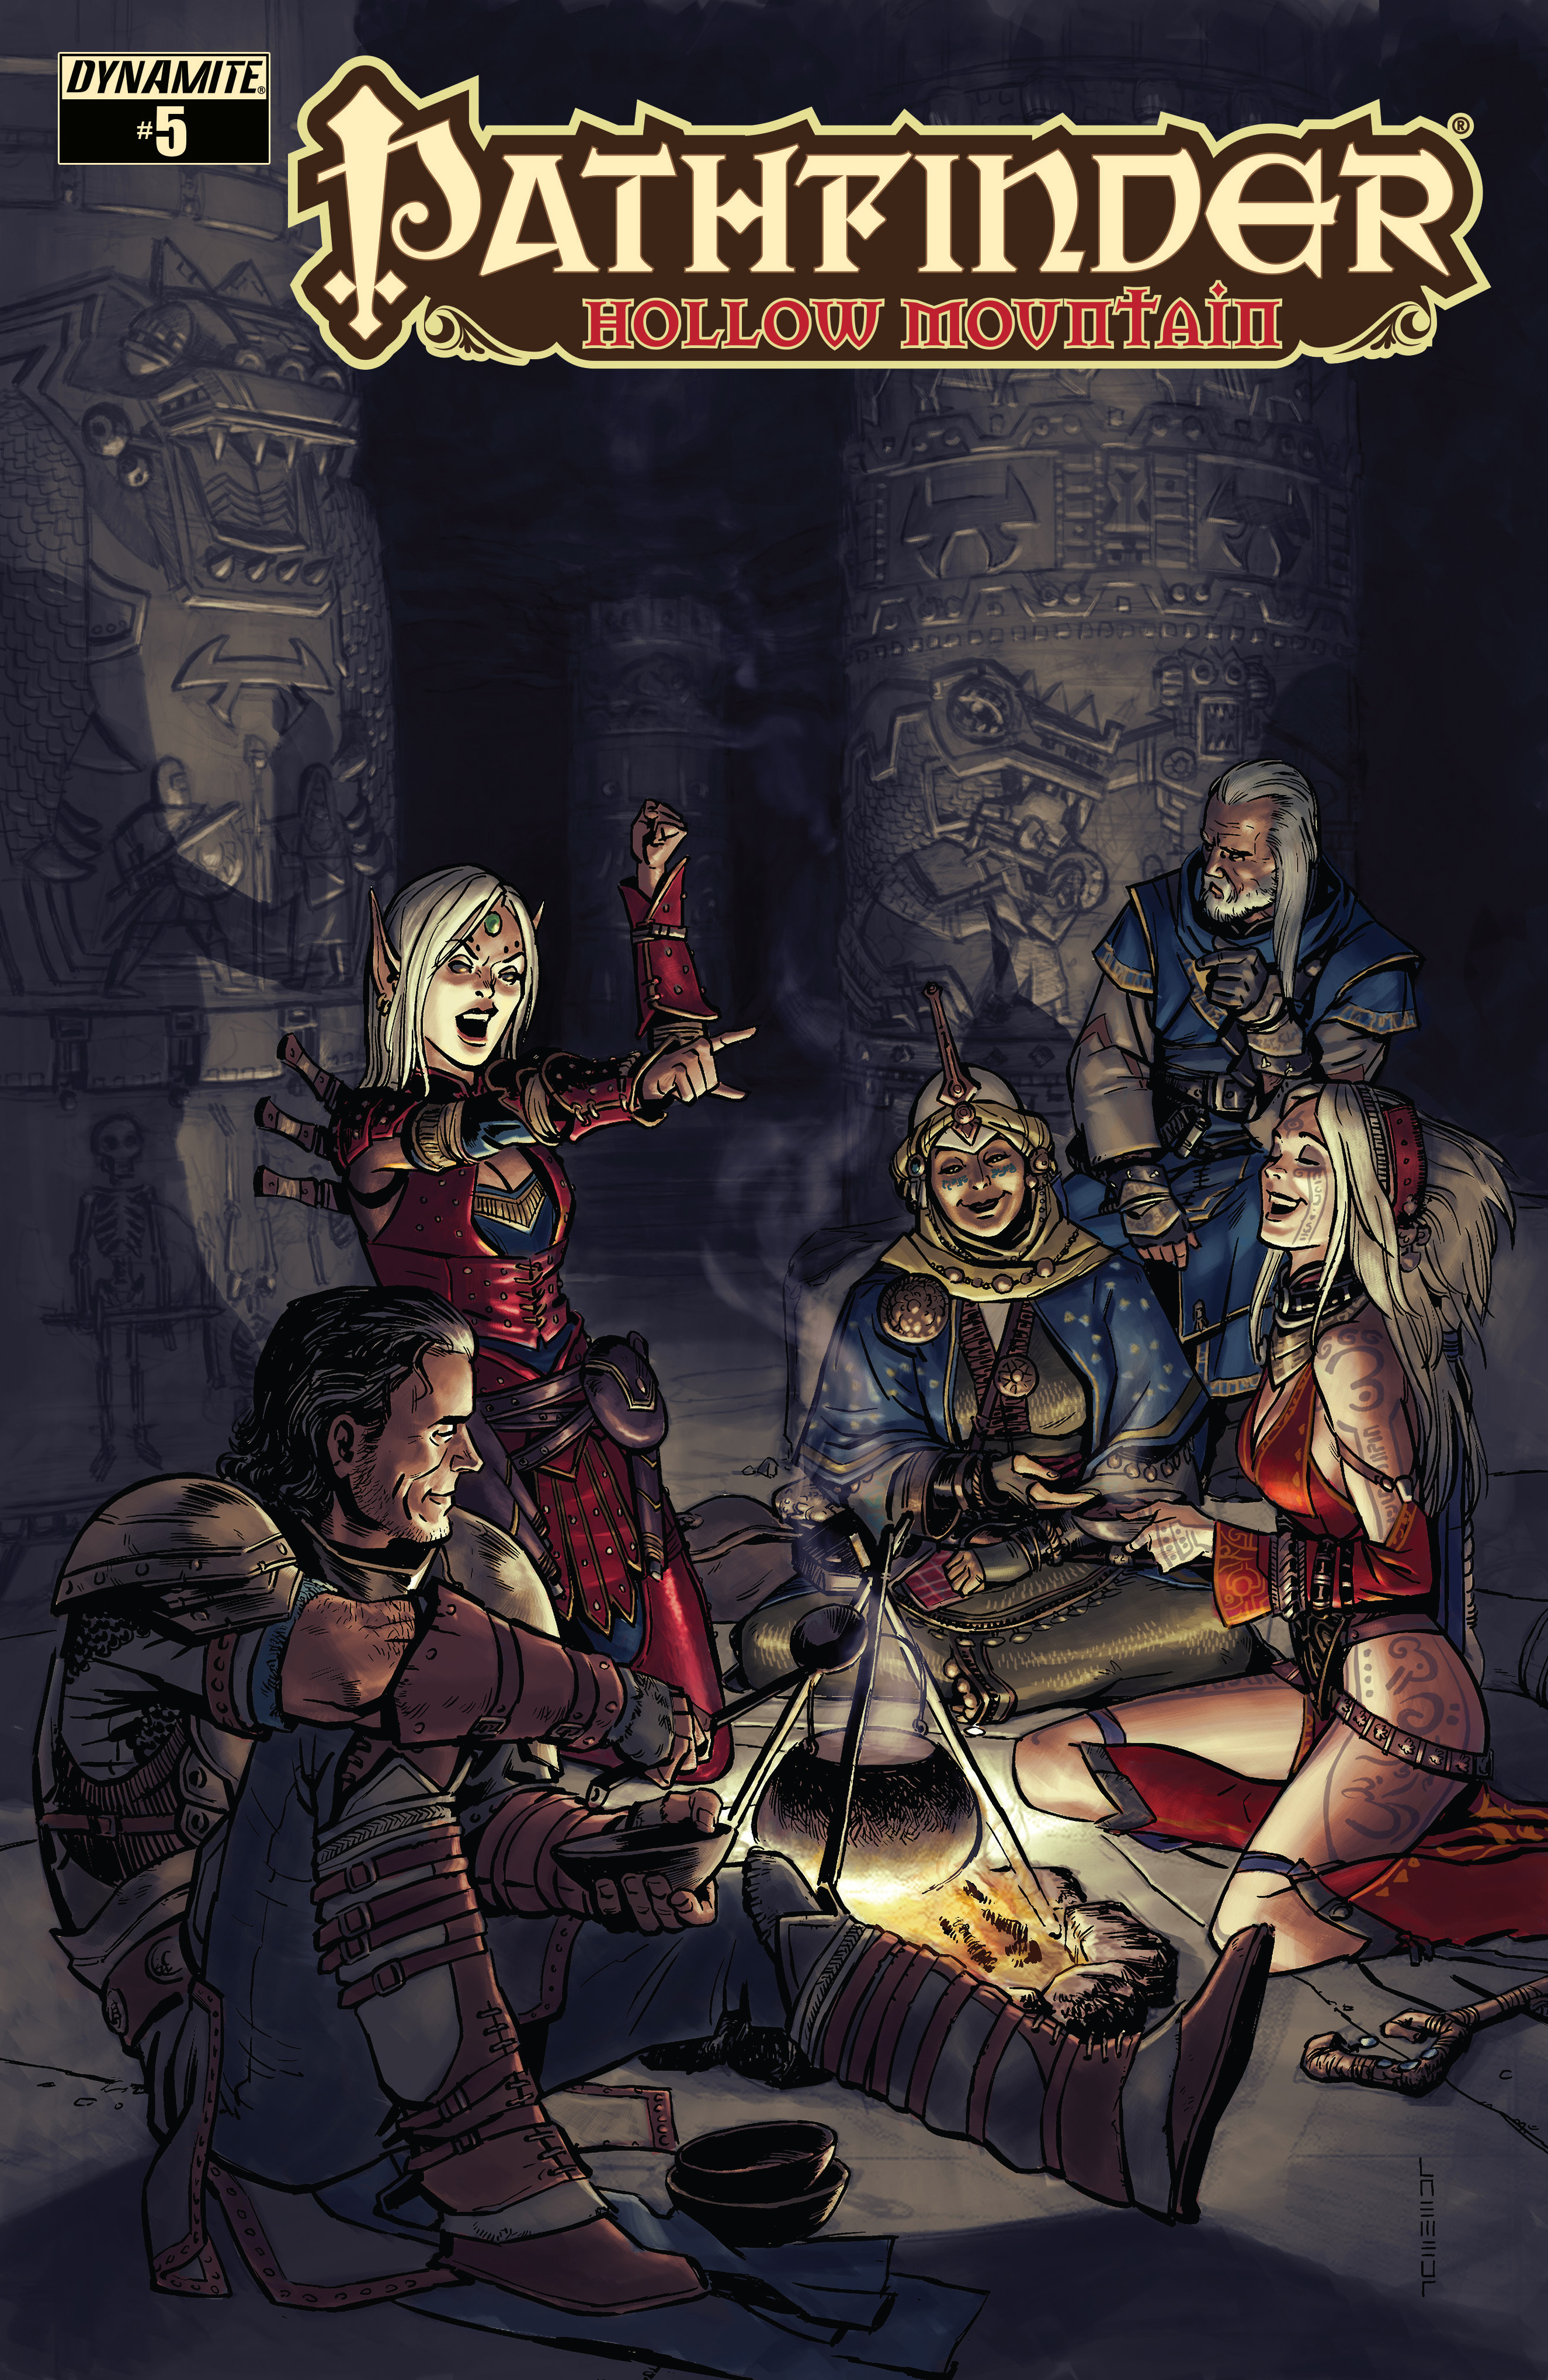 Read online Pathfinder: Hollow Mountain comic -  Issue #5 - 3